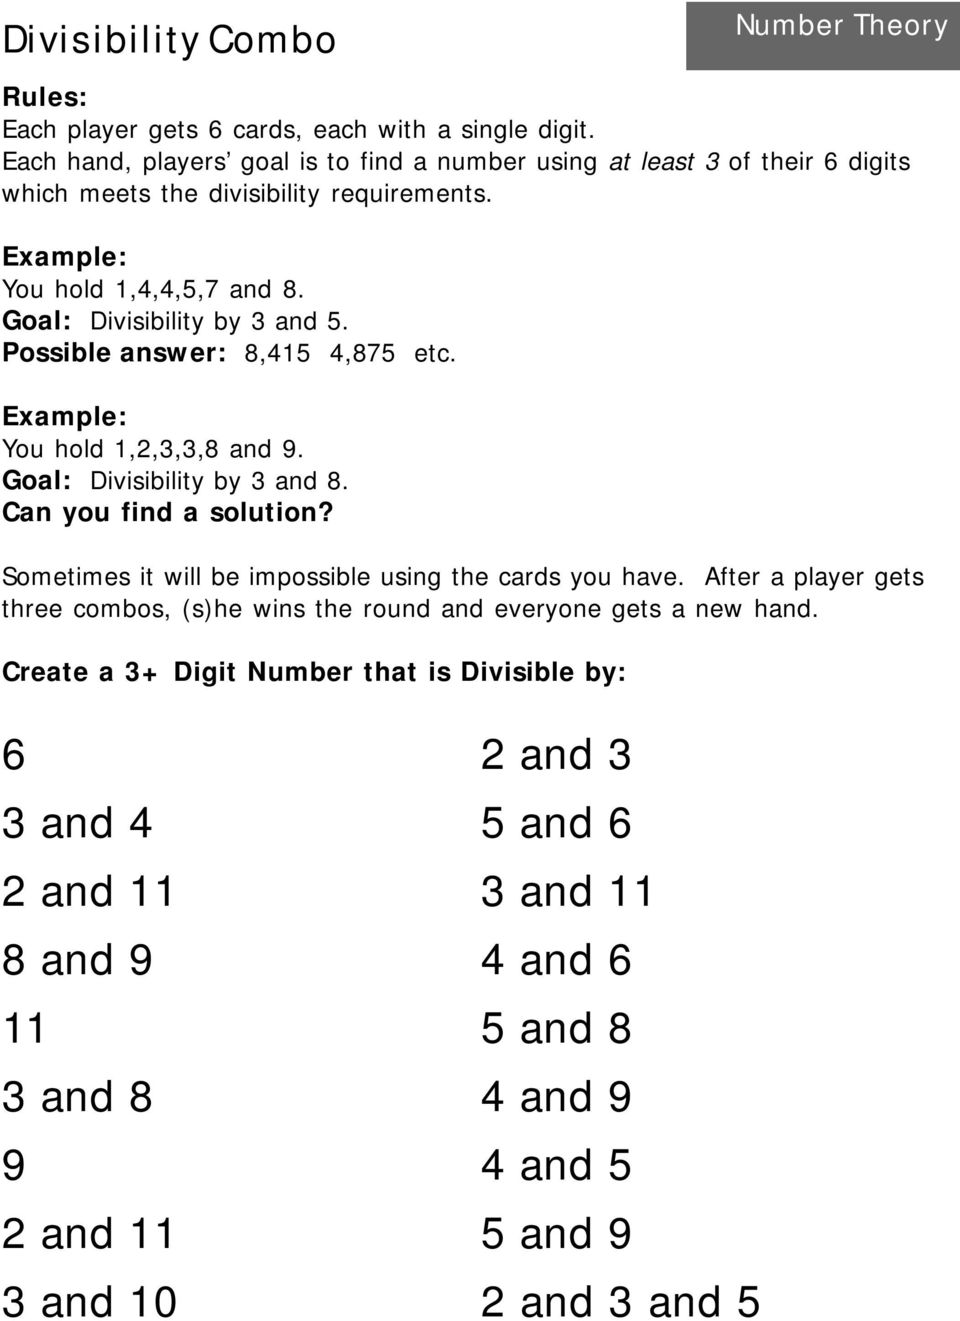 Goal: Divisibility by 3 and 5. Possible answer: 8,415 4,875 etc. Example: You hold 1,,3,3,8 and 9. Goal: Divisibility by 3 and 8. Can you find a solution?